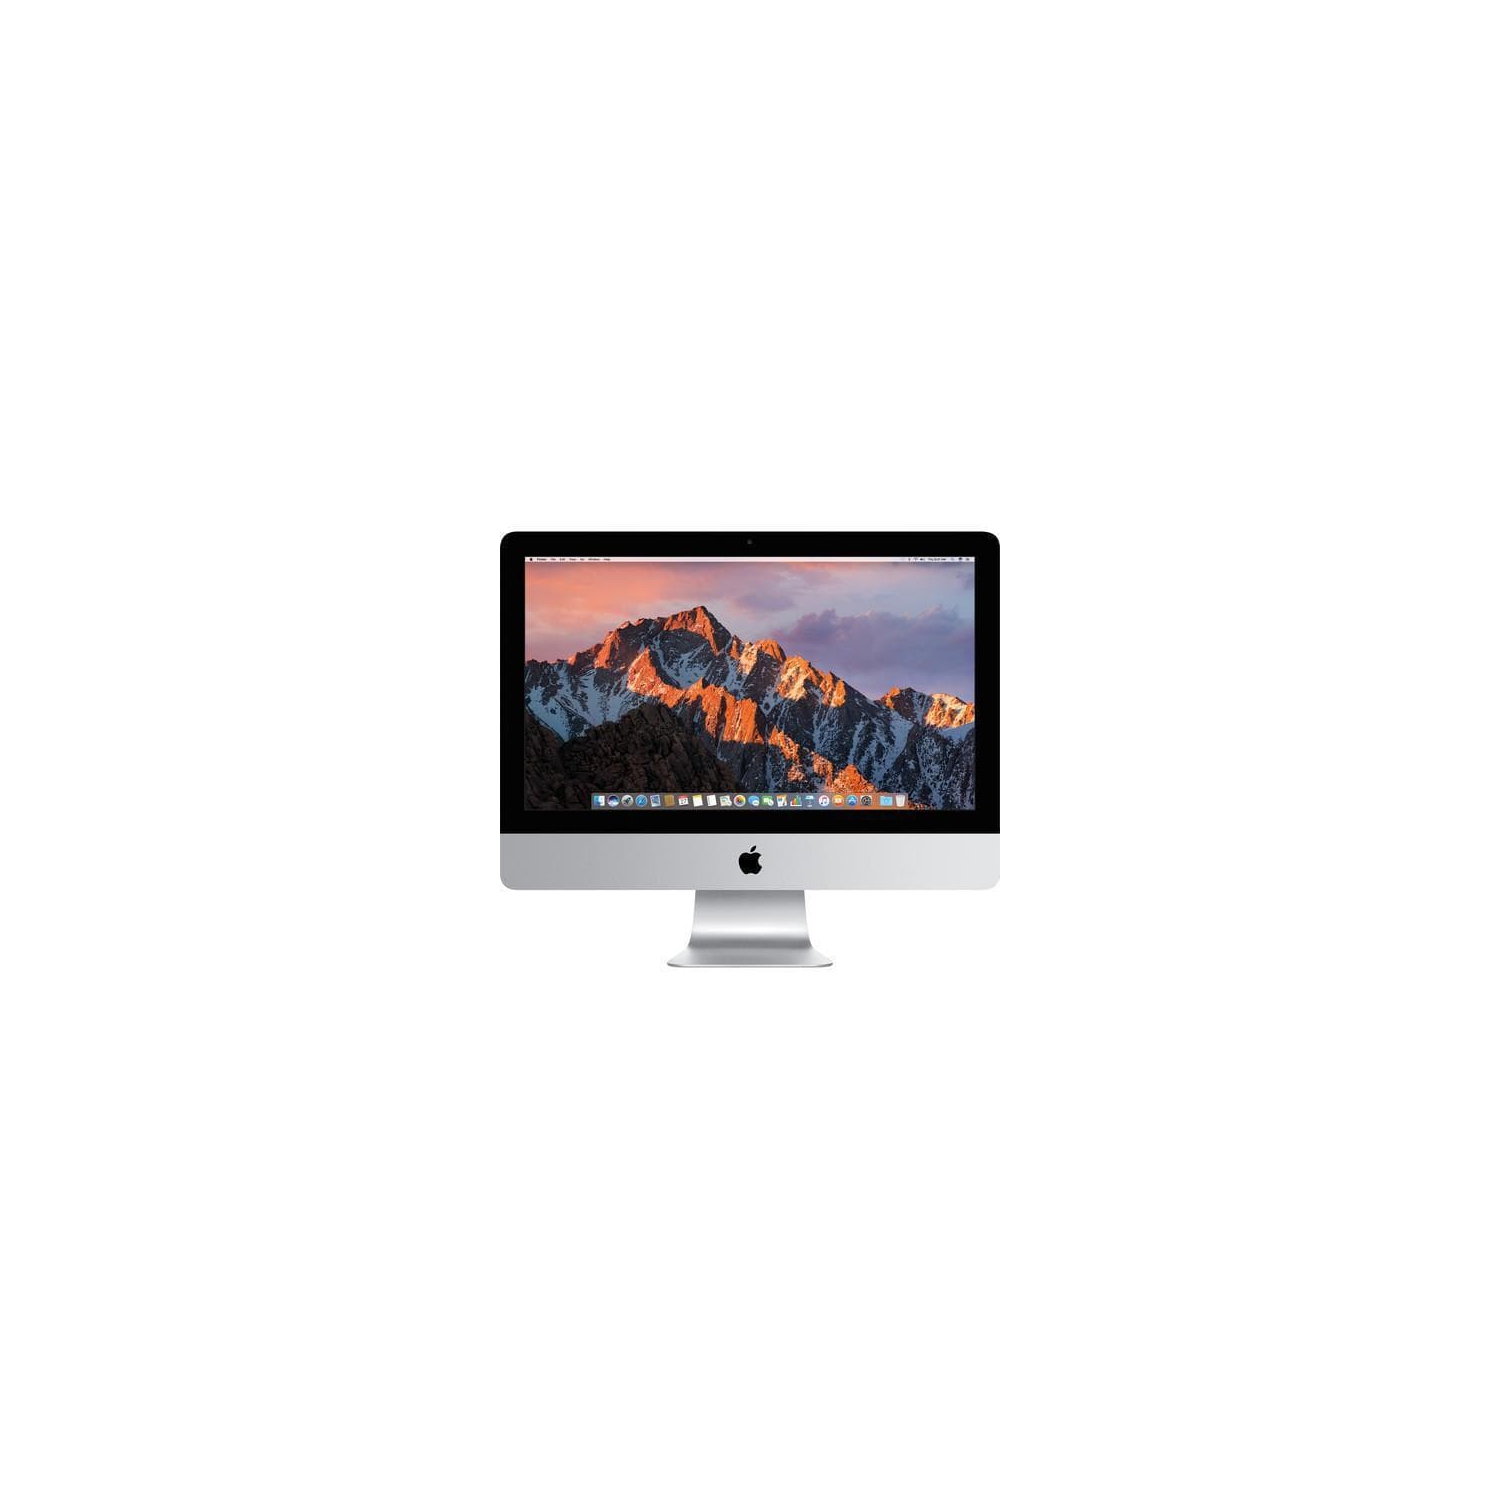 Refurbished (Excellent) Apple iMac 21.5 (Late 2013) Intel Core I5-4570S CPU @ 2.9GHz A1418 16GB RAM 512GB SSD Silver